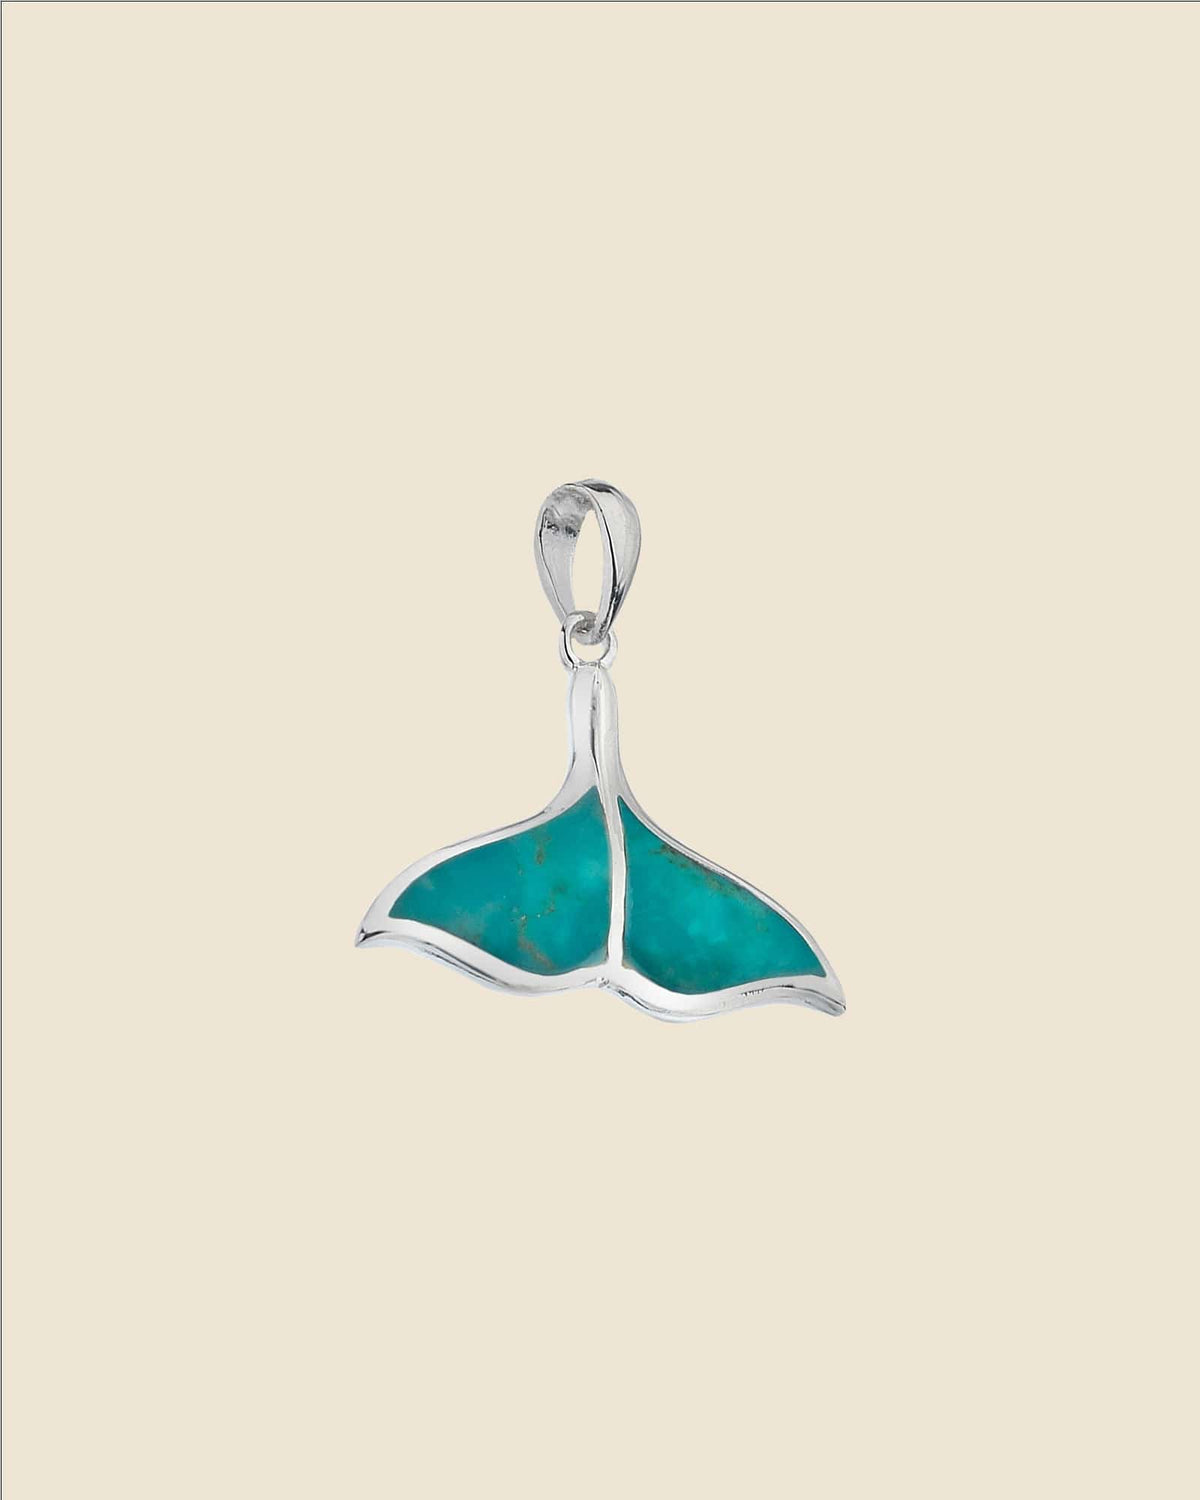 Sterling Silver and Turquoise Whale Tail Pendant